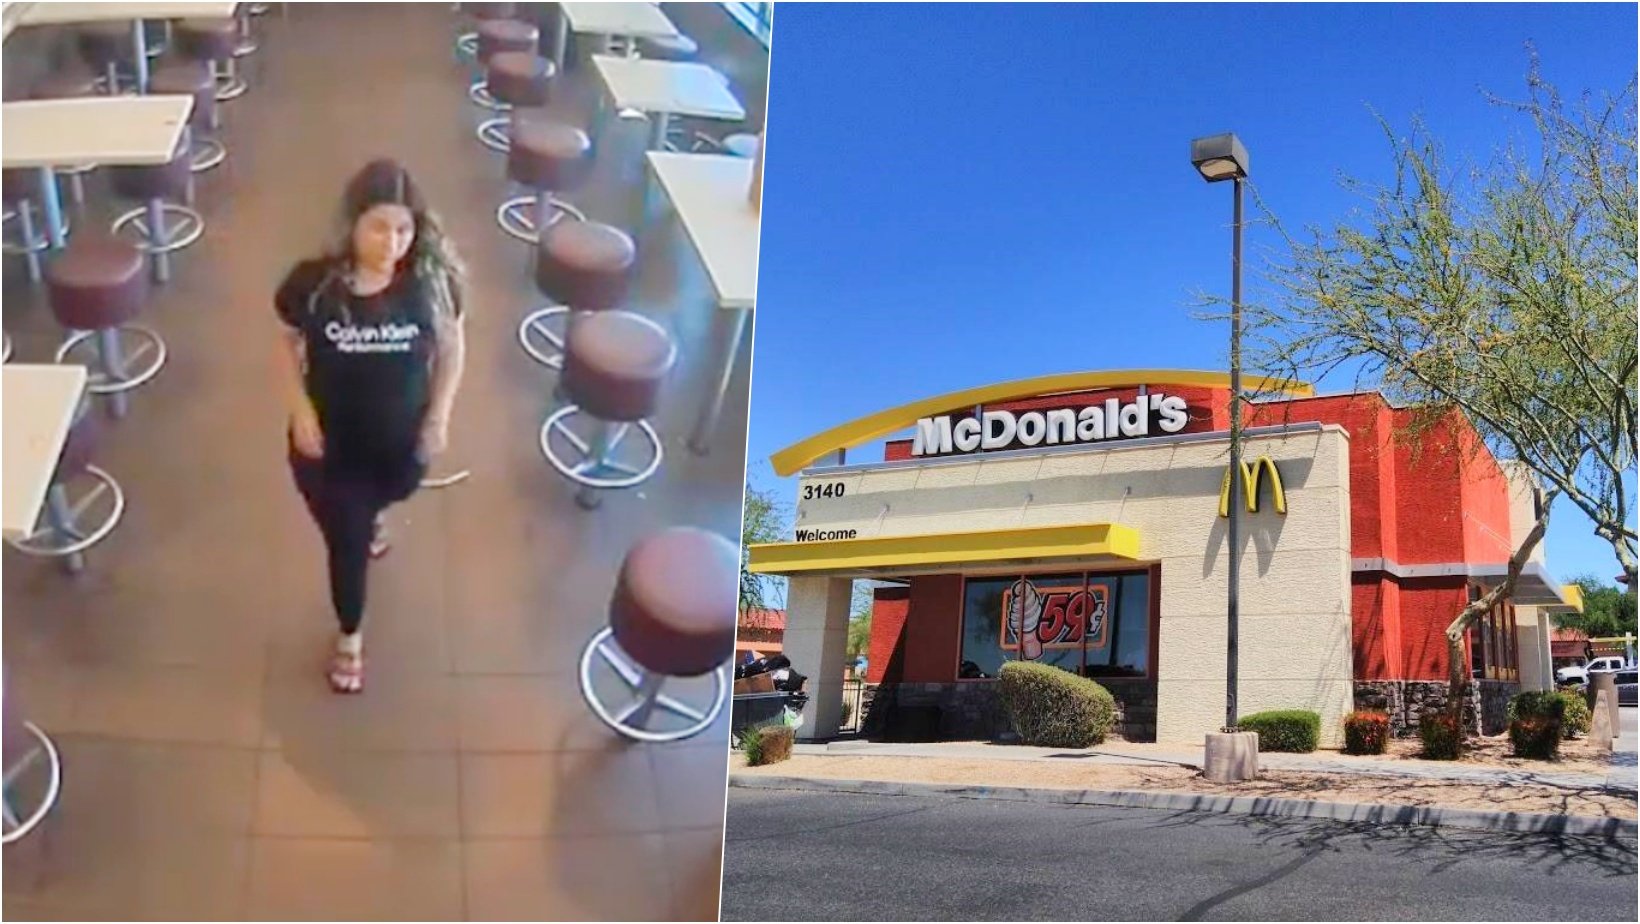 6 facebook cover 6.jpg?resize=412,275 - Newborn Was FOUND DEAD Inside McDonald’s Bathroom In West Phoenix With Authorities Searching For A Woman